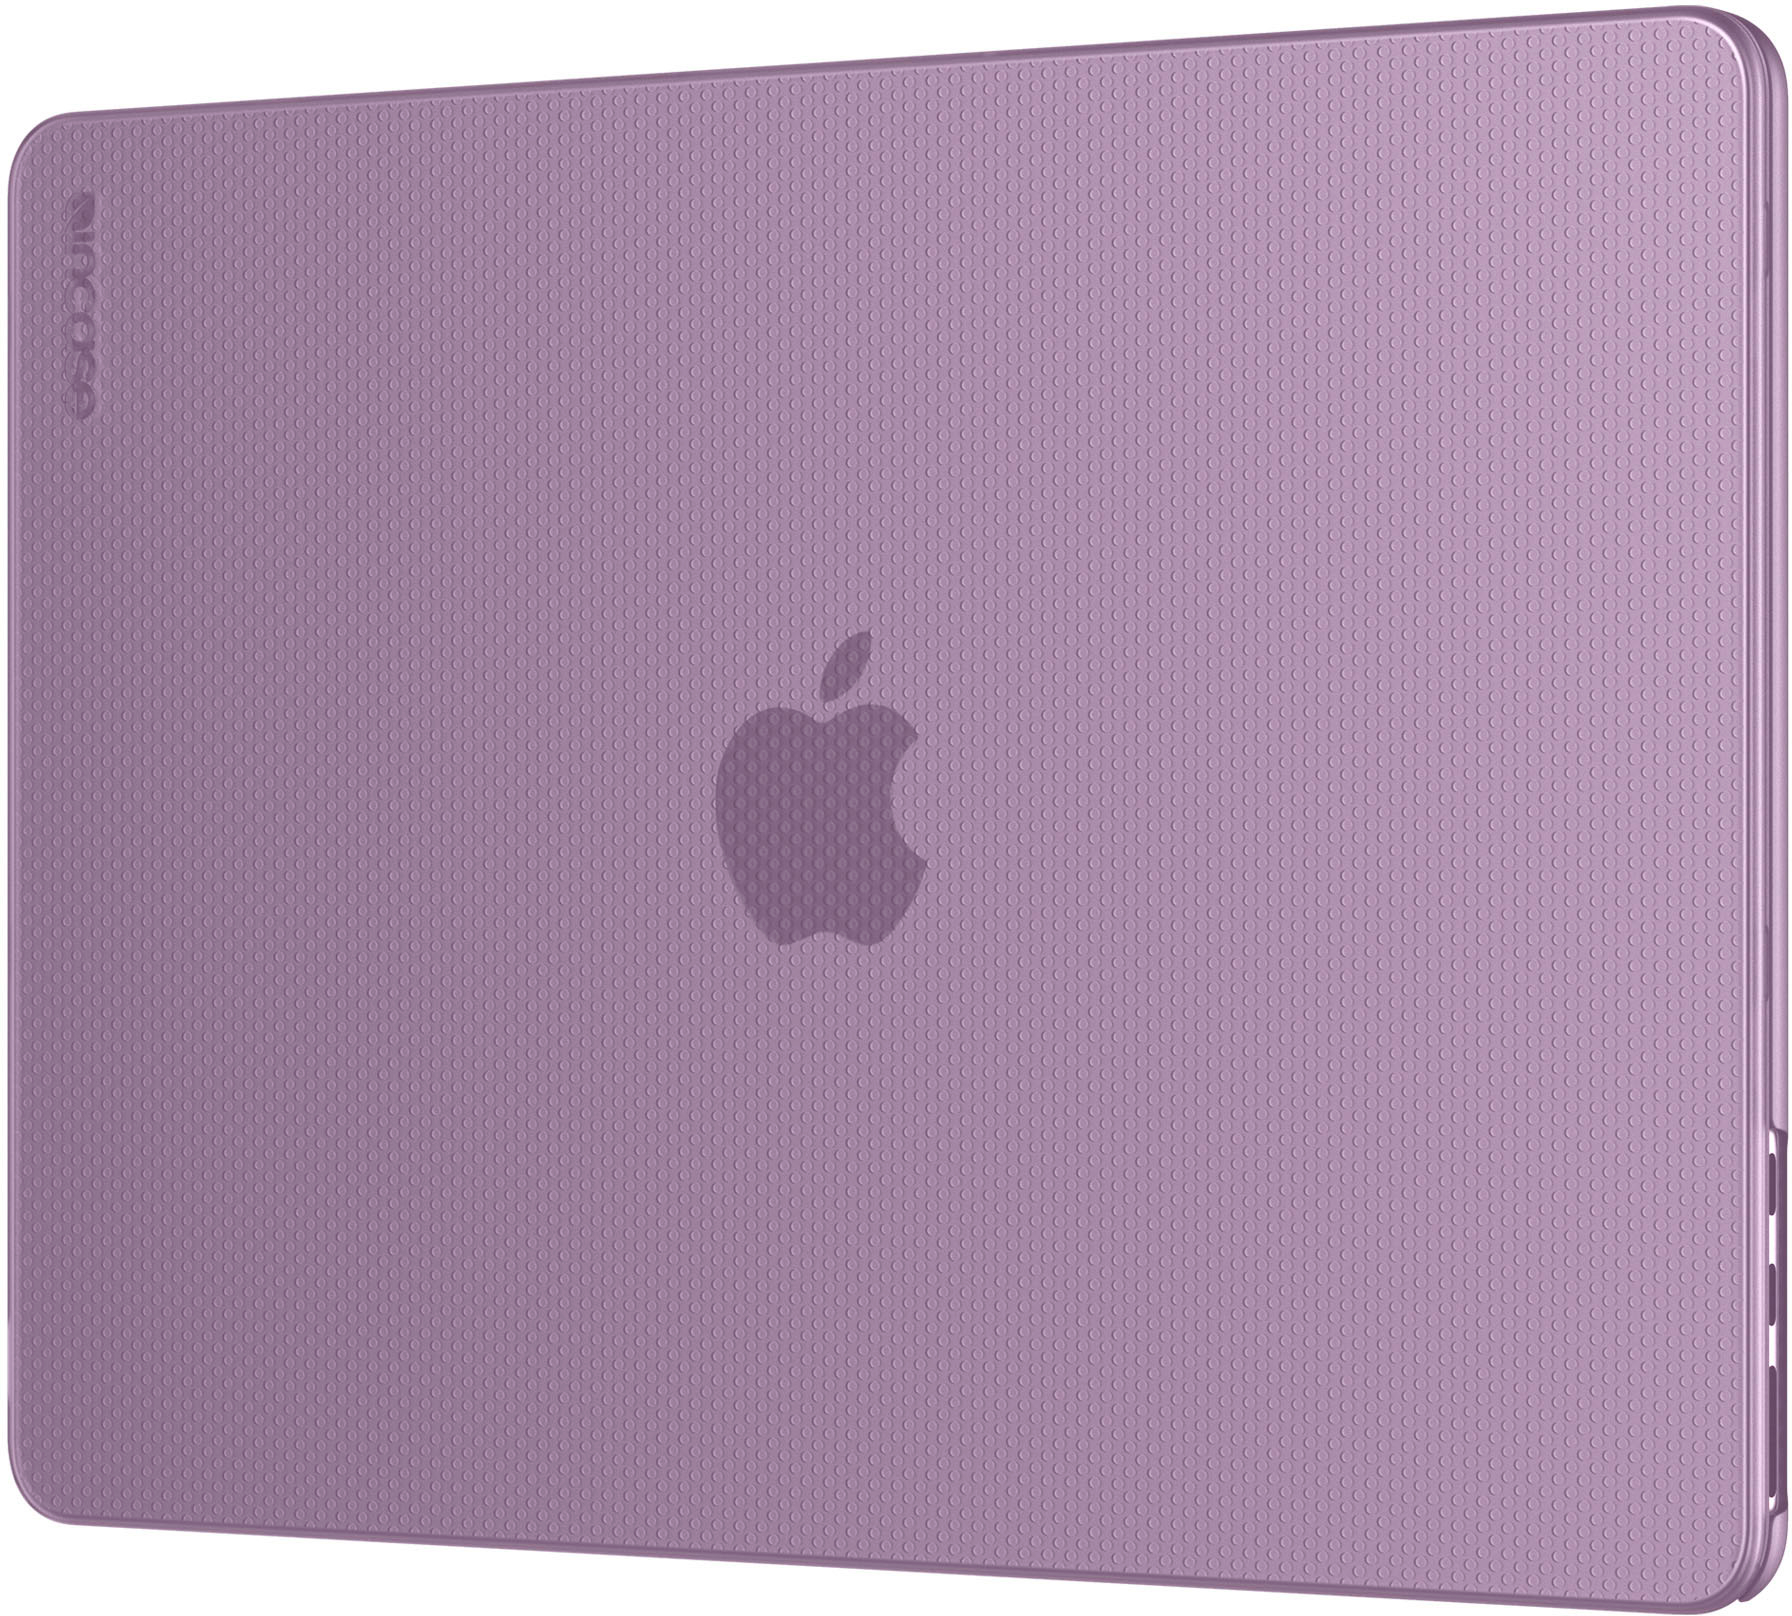 Dots Hardshell Case for 15 MacBook Air